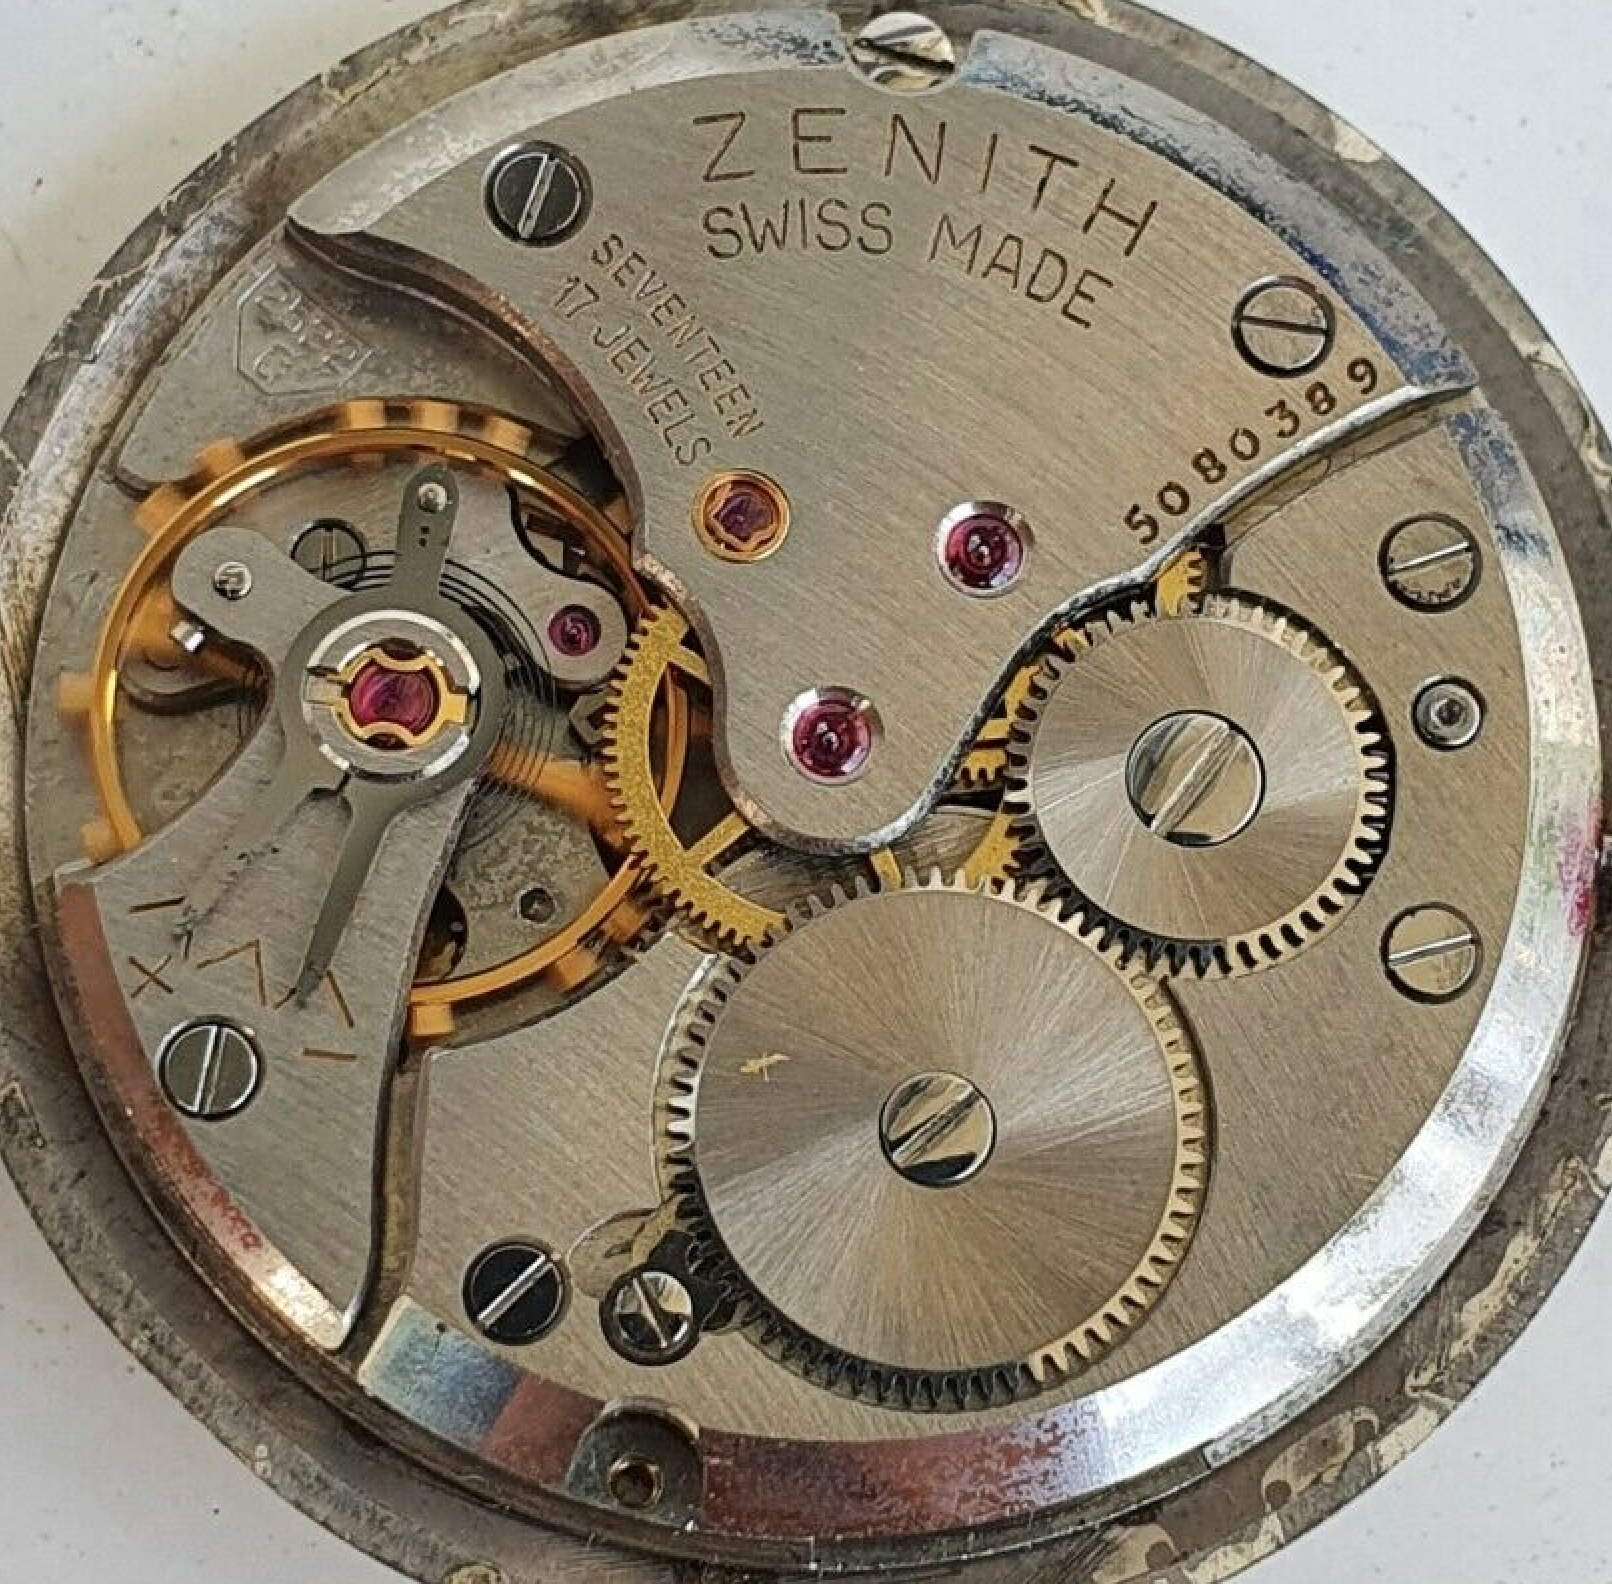 Zenith caliber 2522C movement – specifications and photo